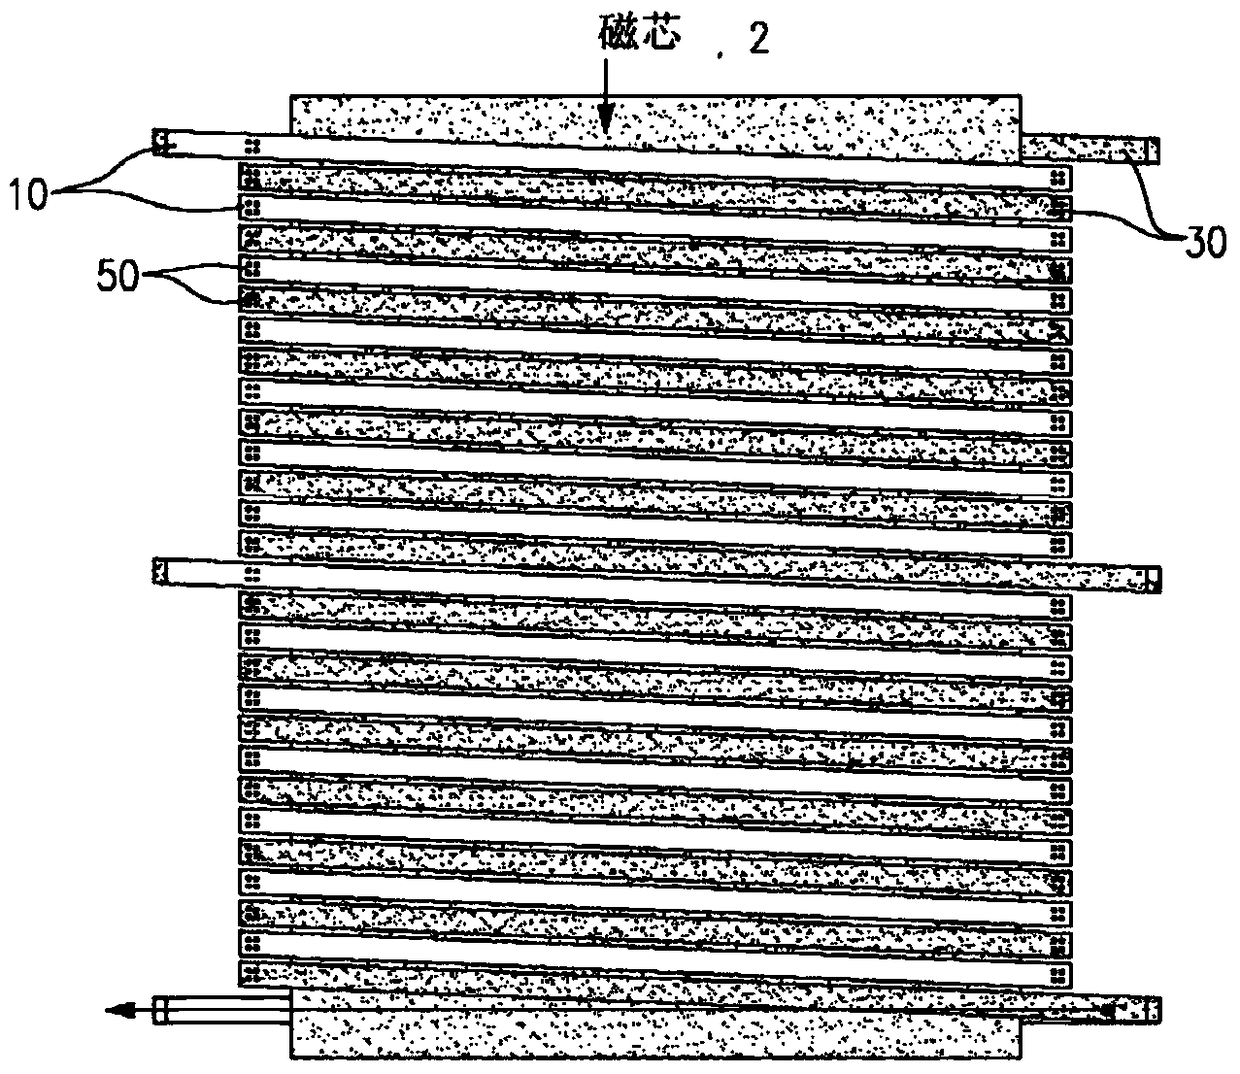 Inductive components used in integrated circuits, transformers and inductors that form part of integrated circuits